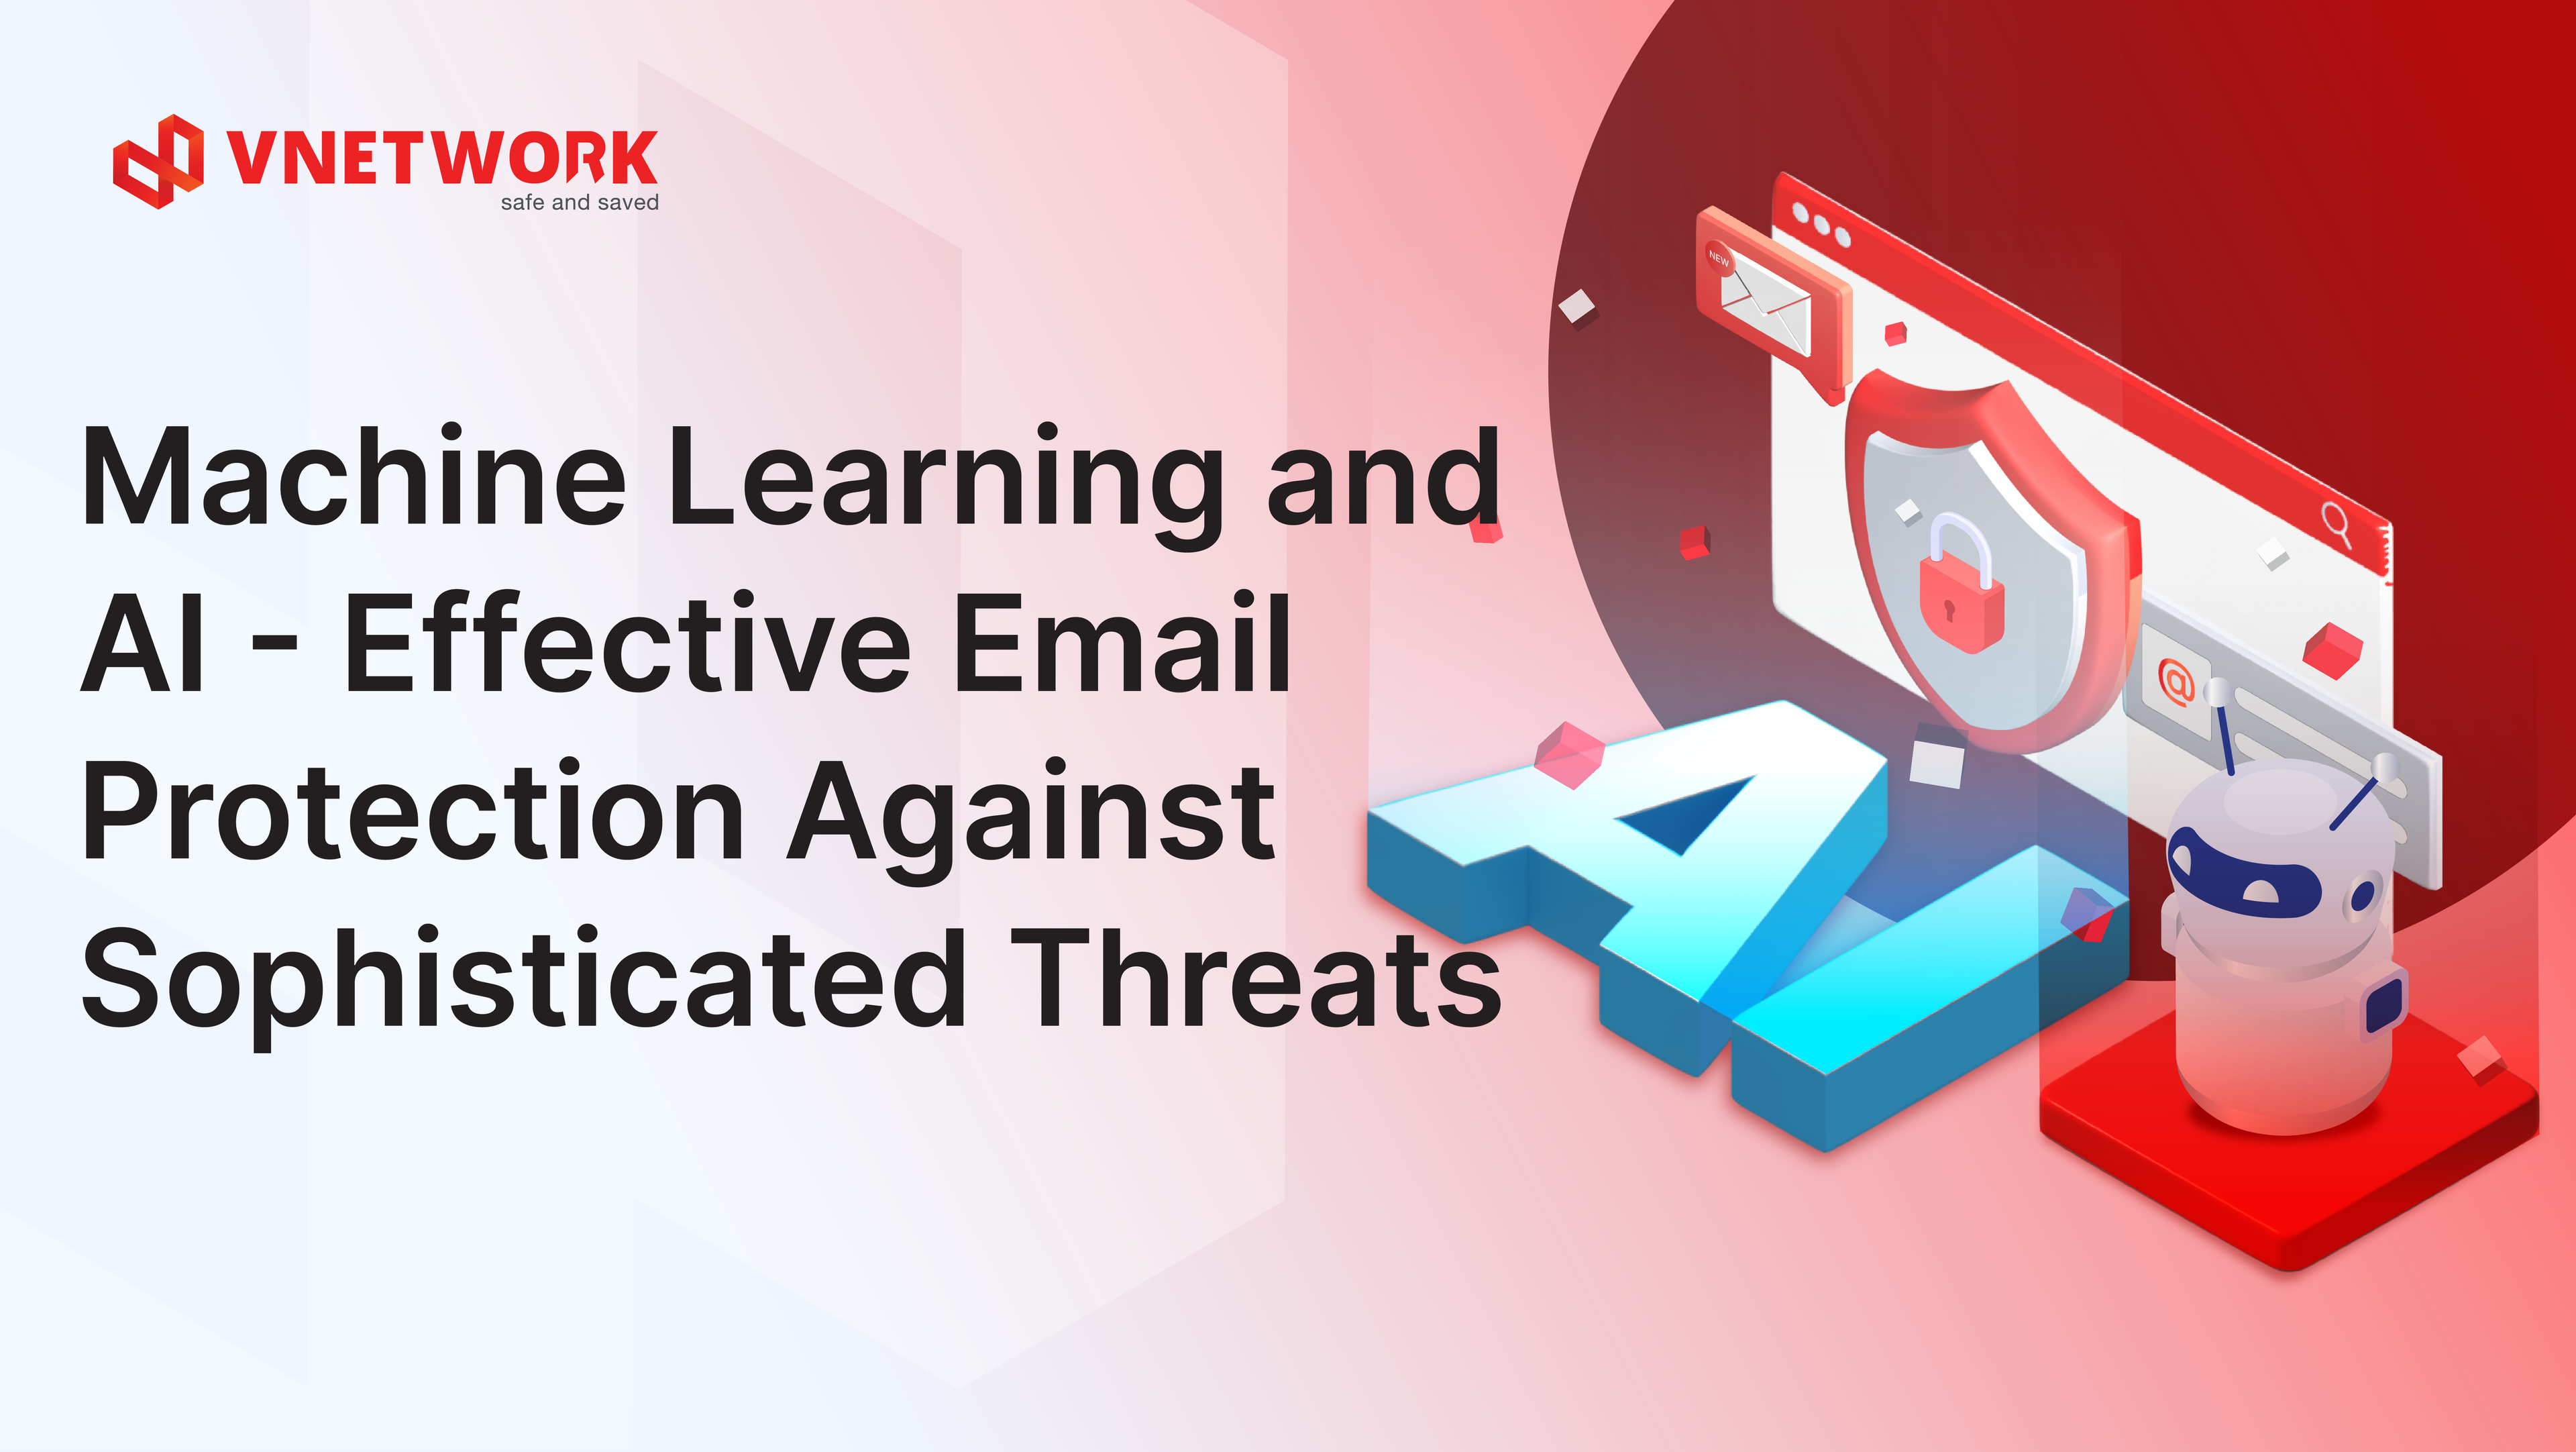 Machine Learning and AI - Effective Email Protection Against Sophisticated Threats